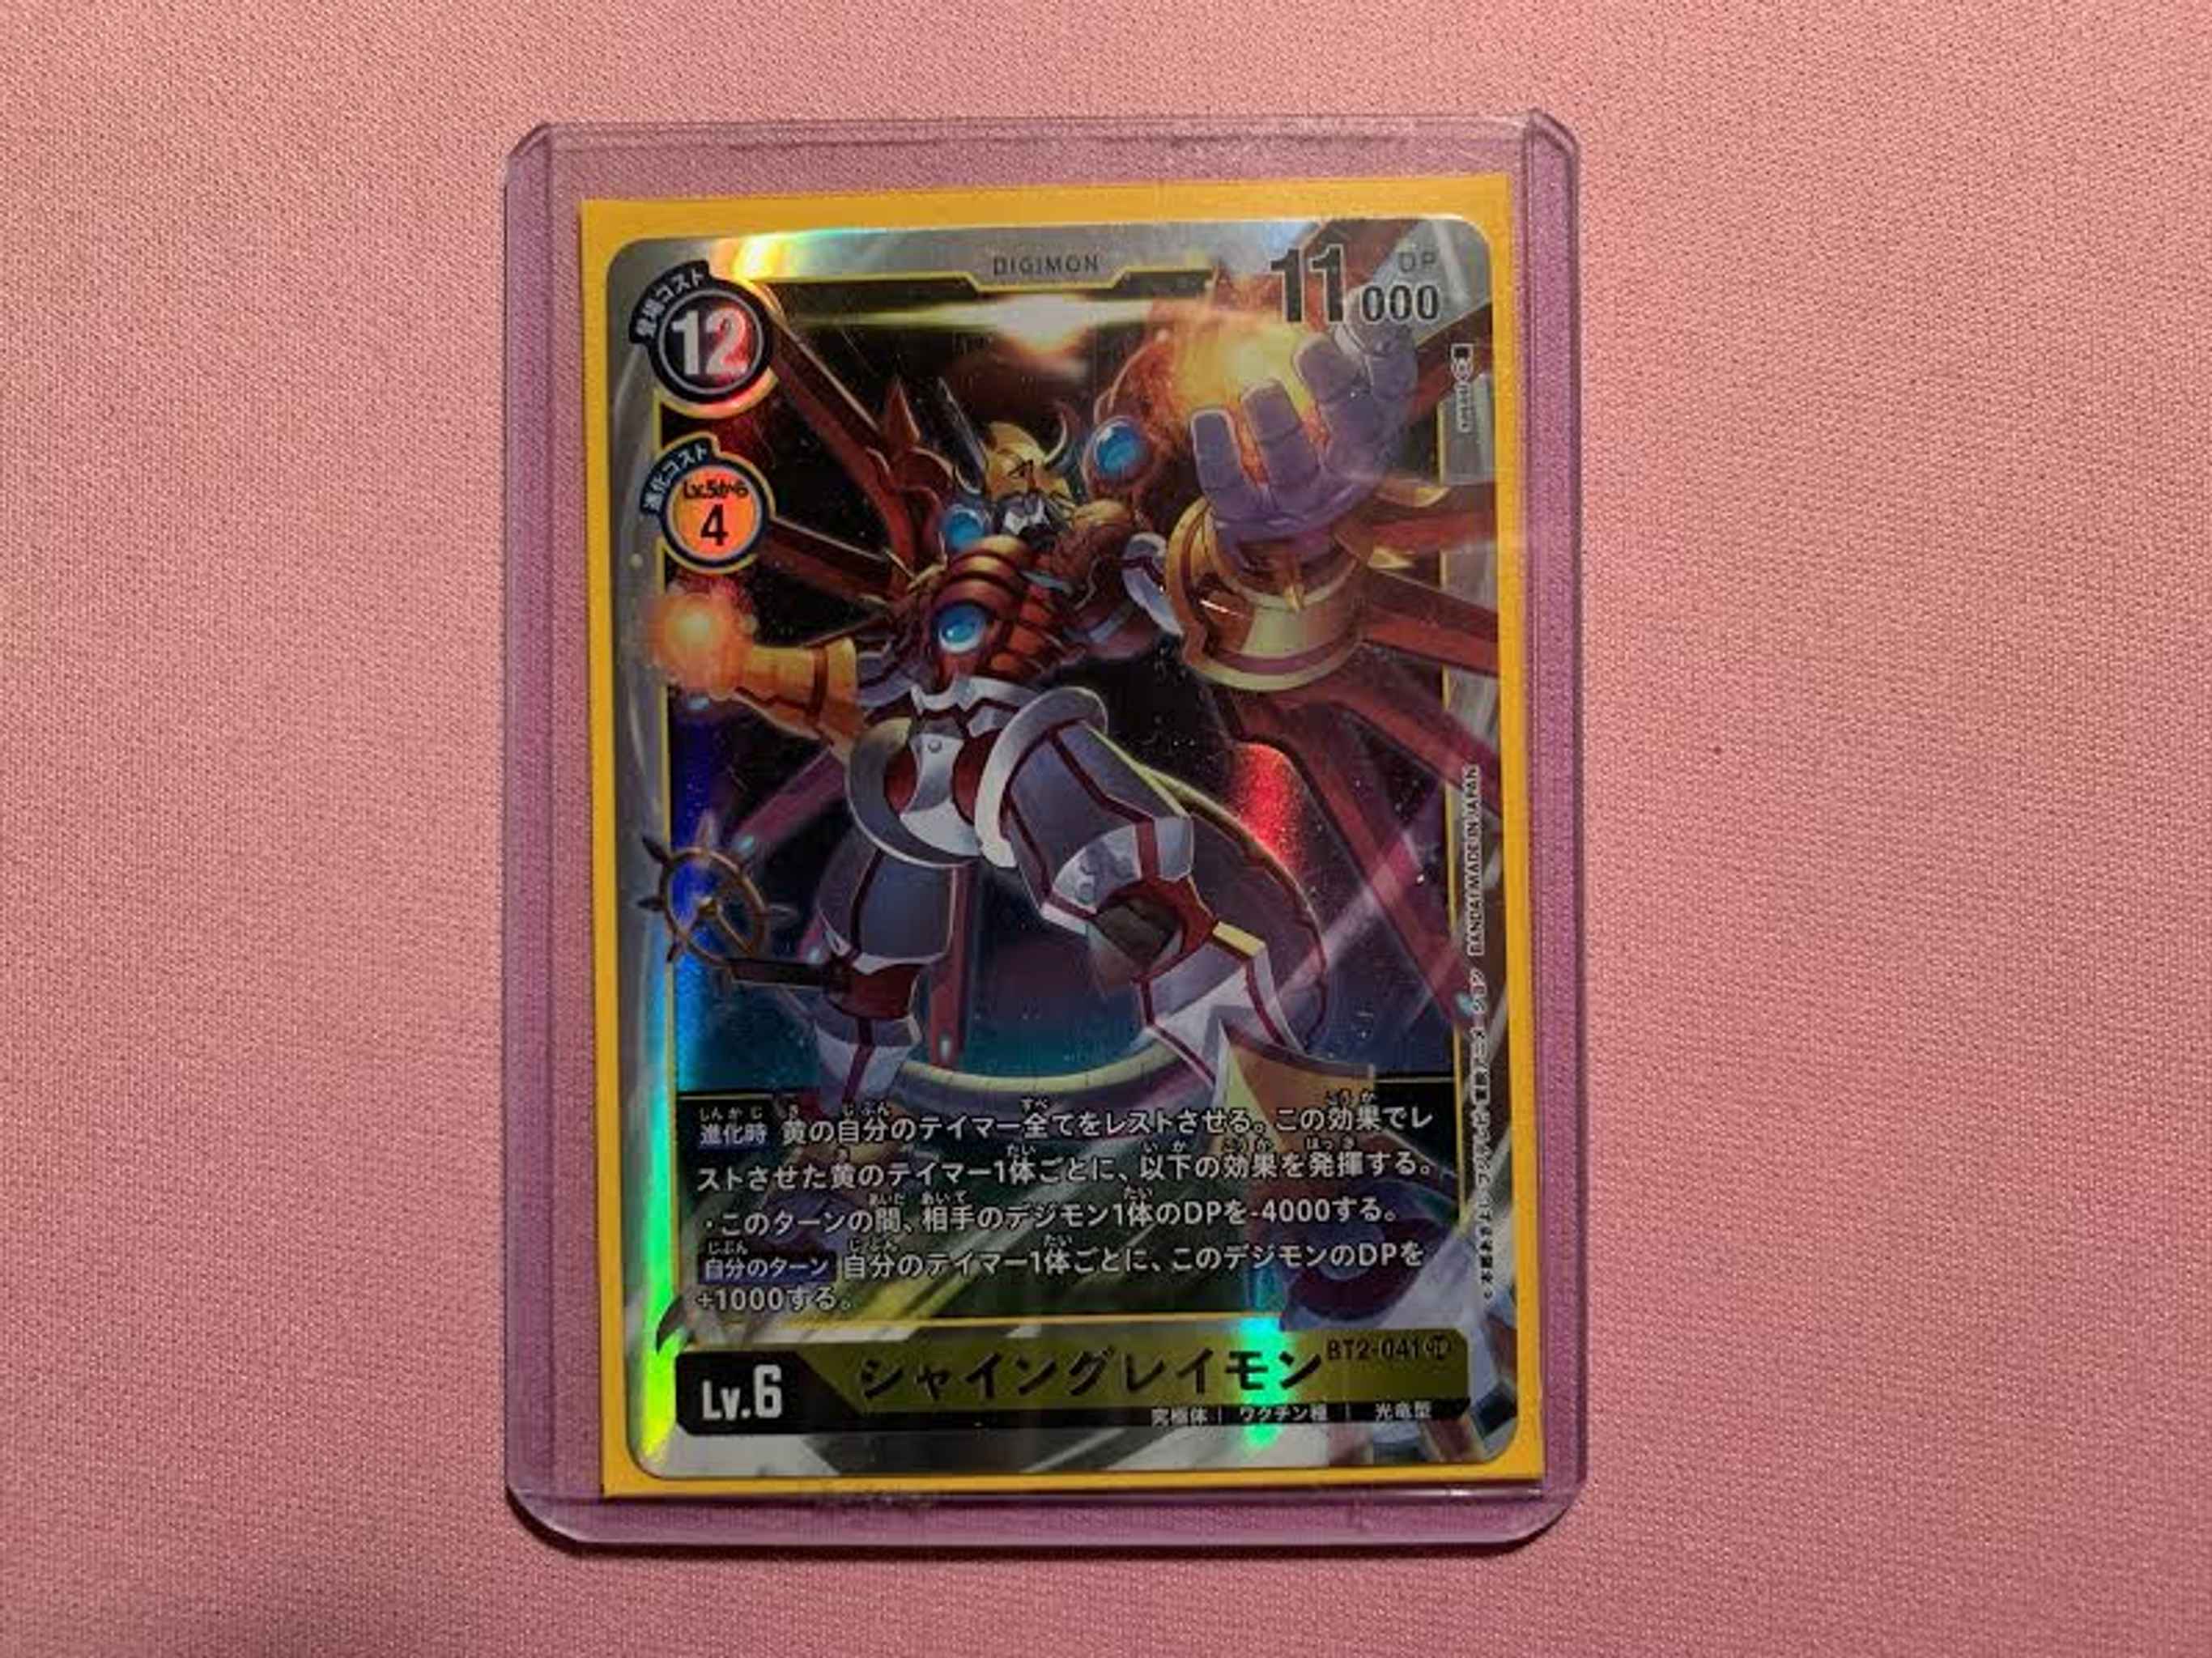 Shinegreymon Japanese Shinegreymon Release Special Booster Digimon Card Game Online Gaming Store For Cards Miniatures Singles Packs Booster Boxes